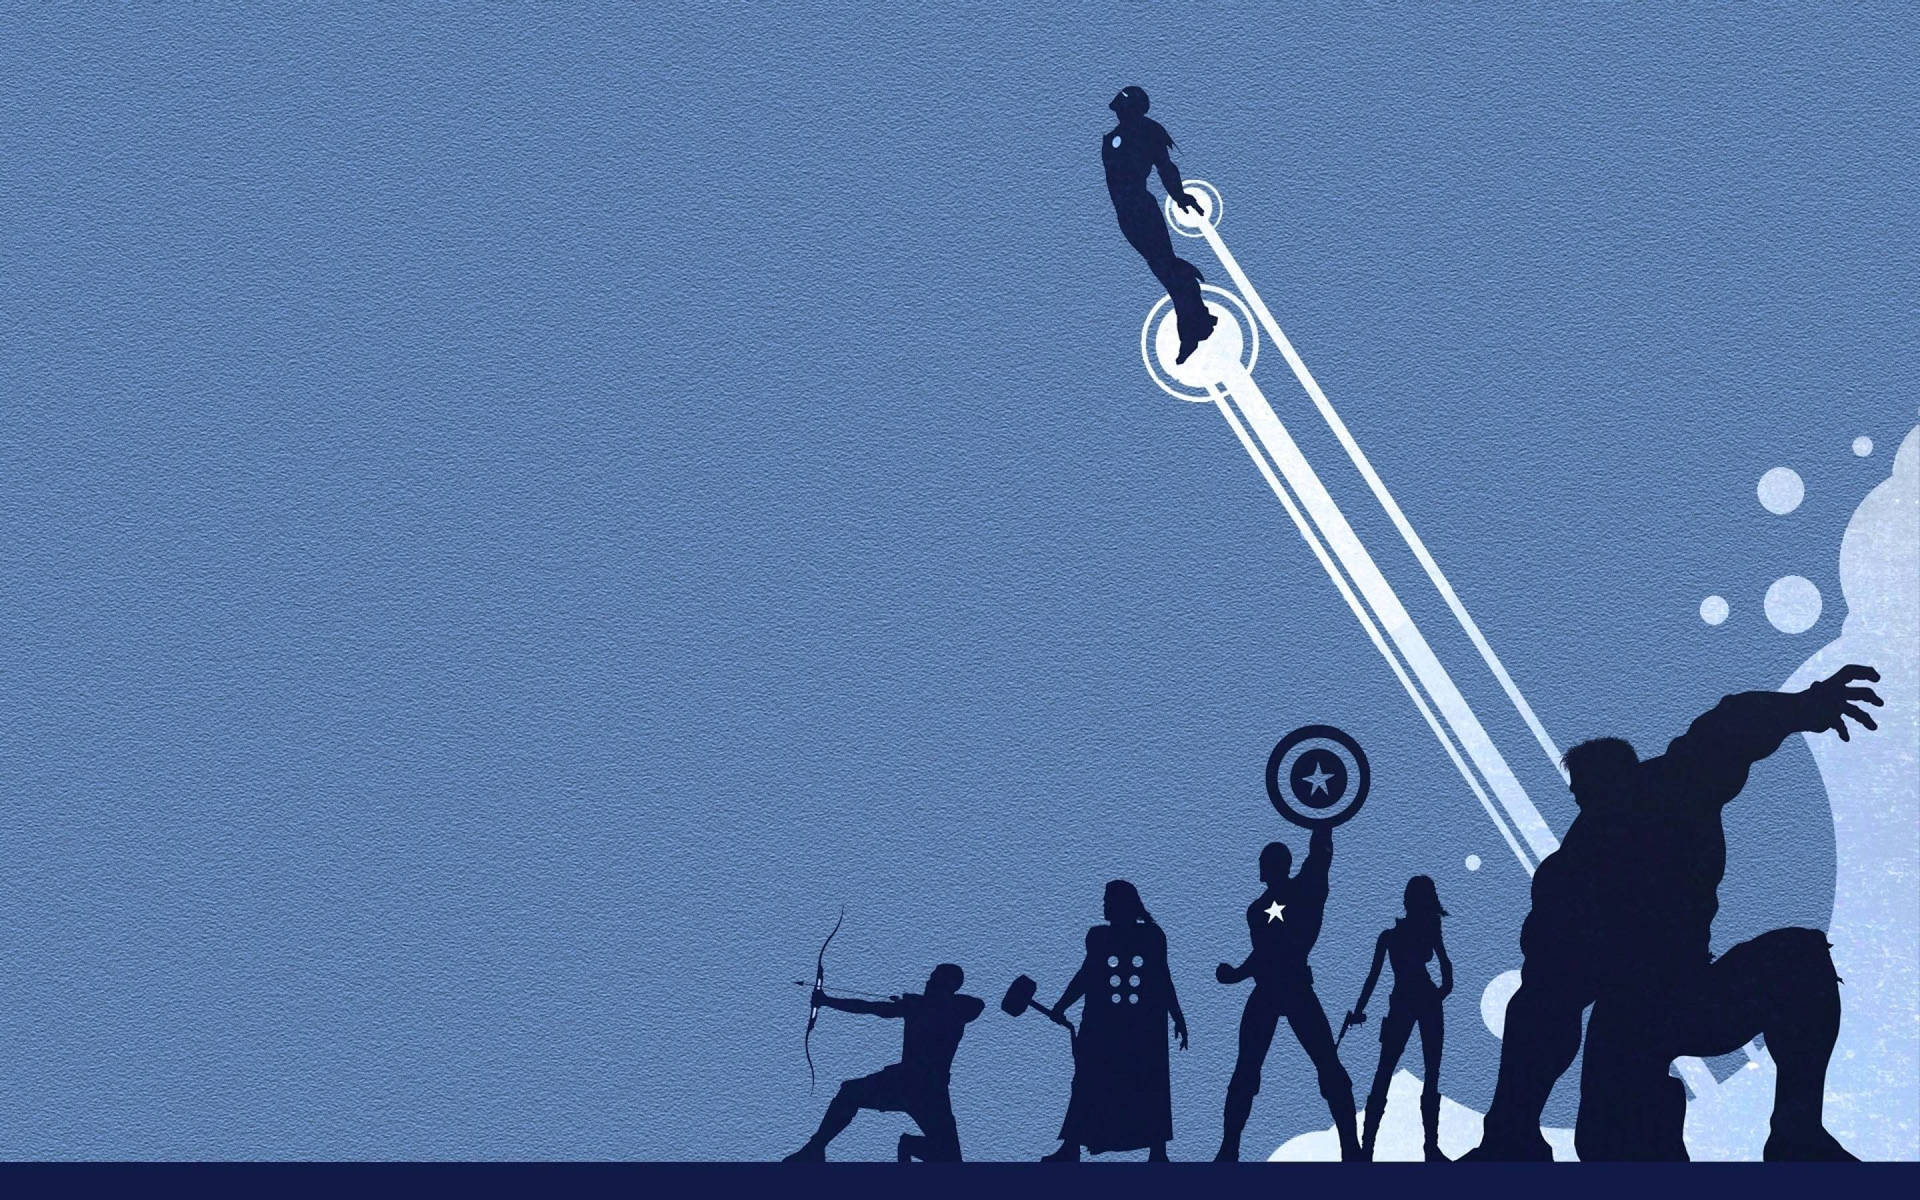 Avengers superheroes shadow in a blue minimalist background.